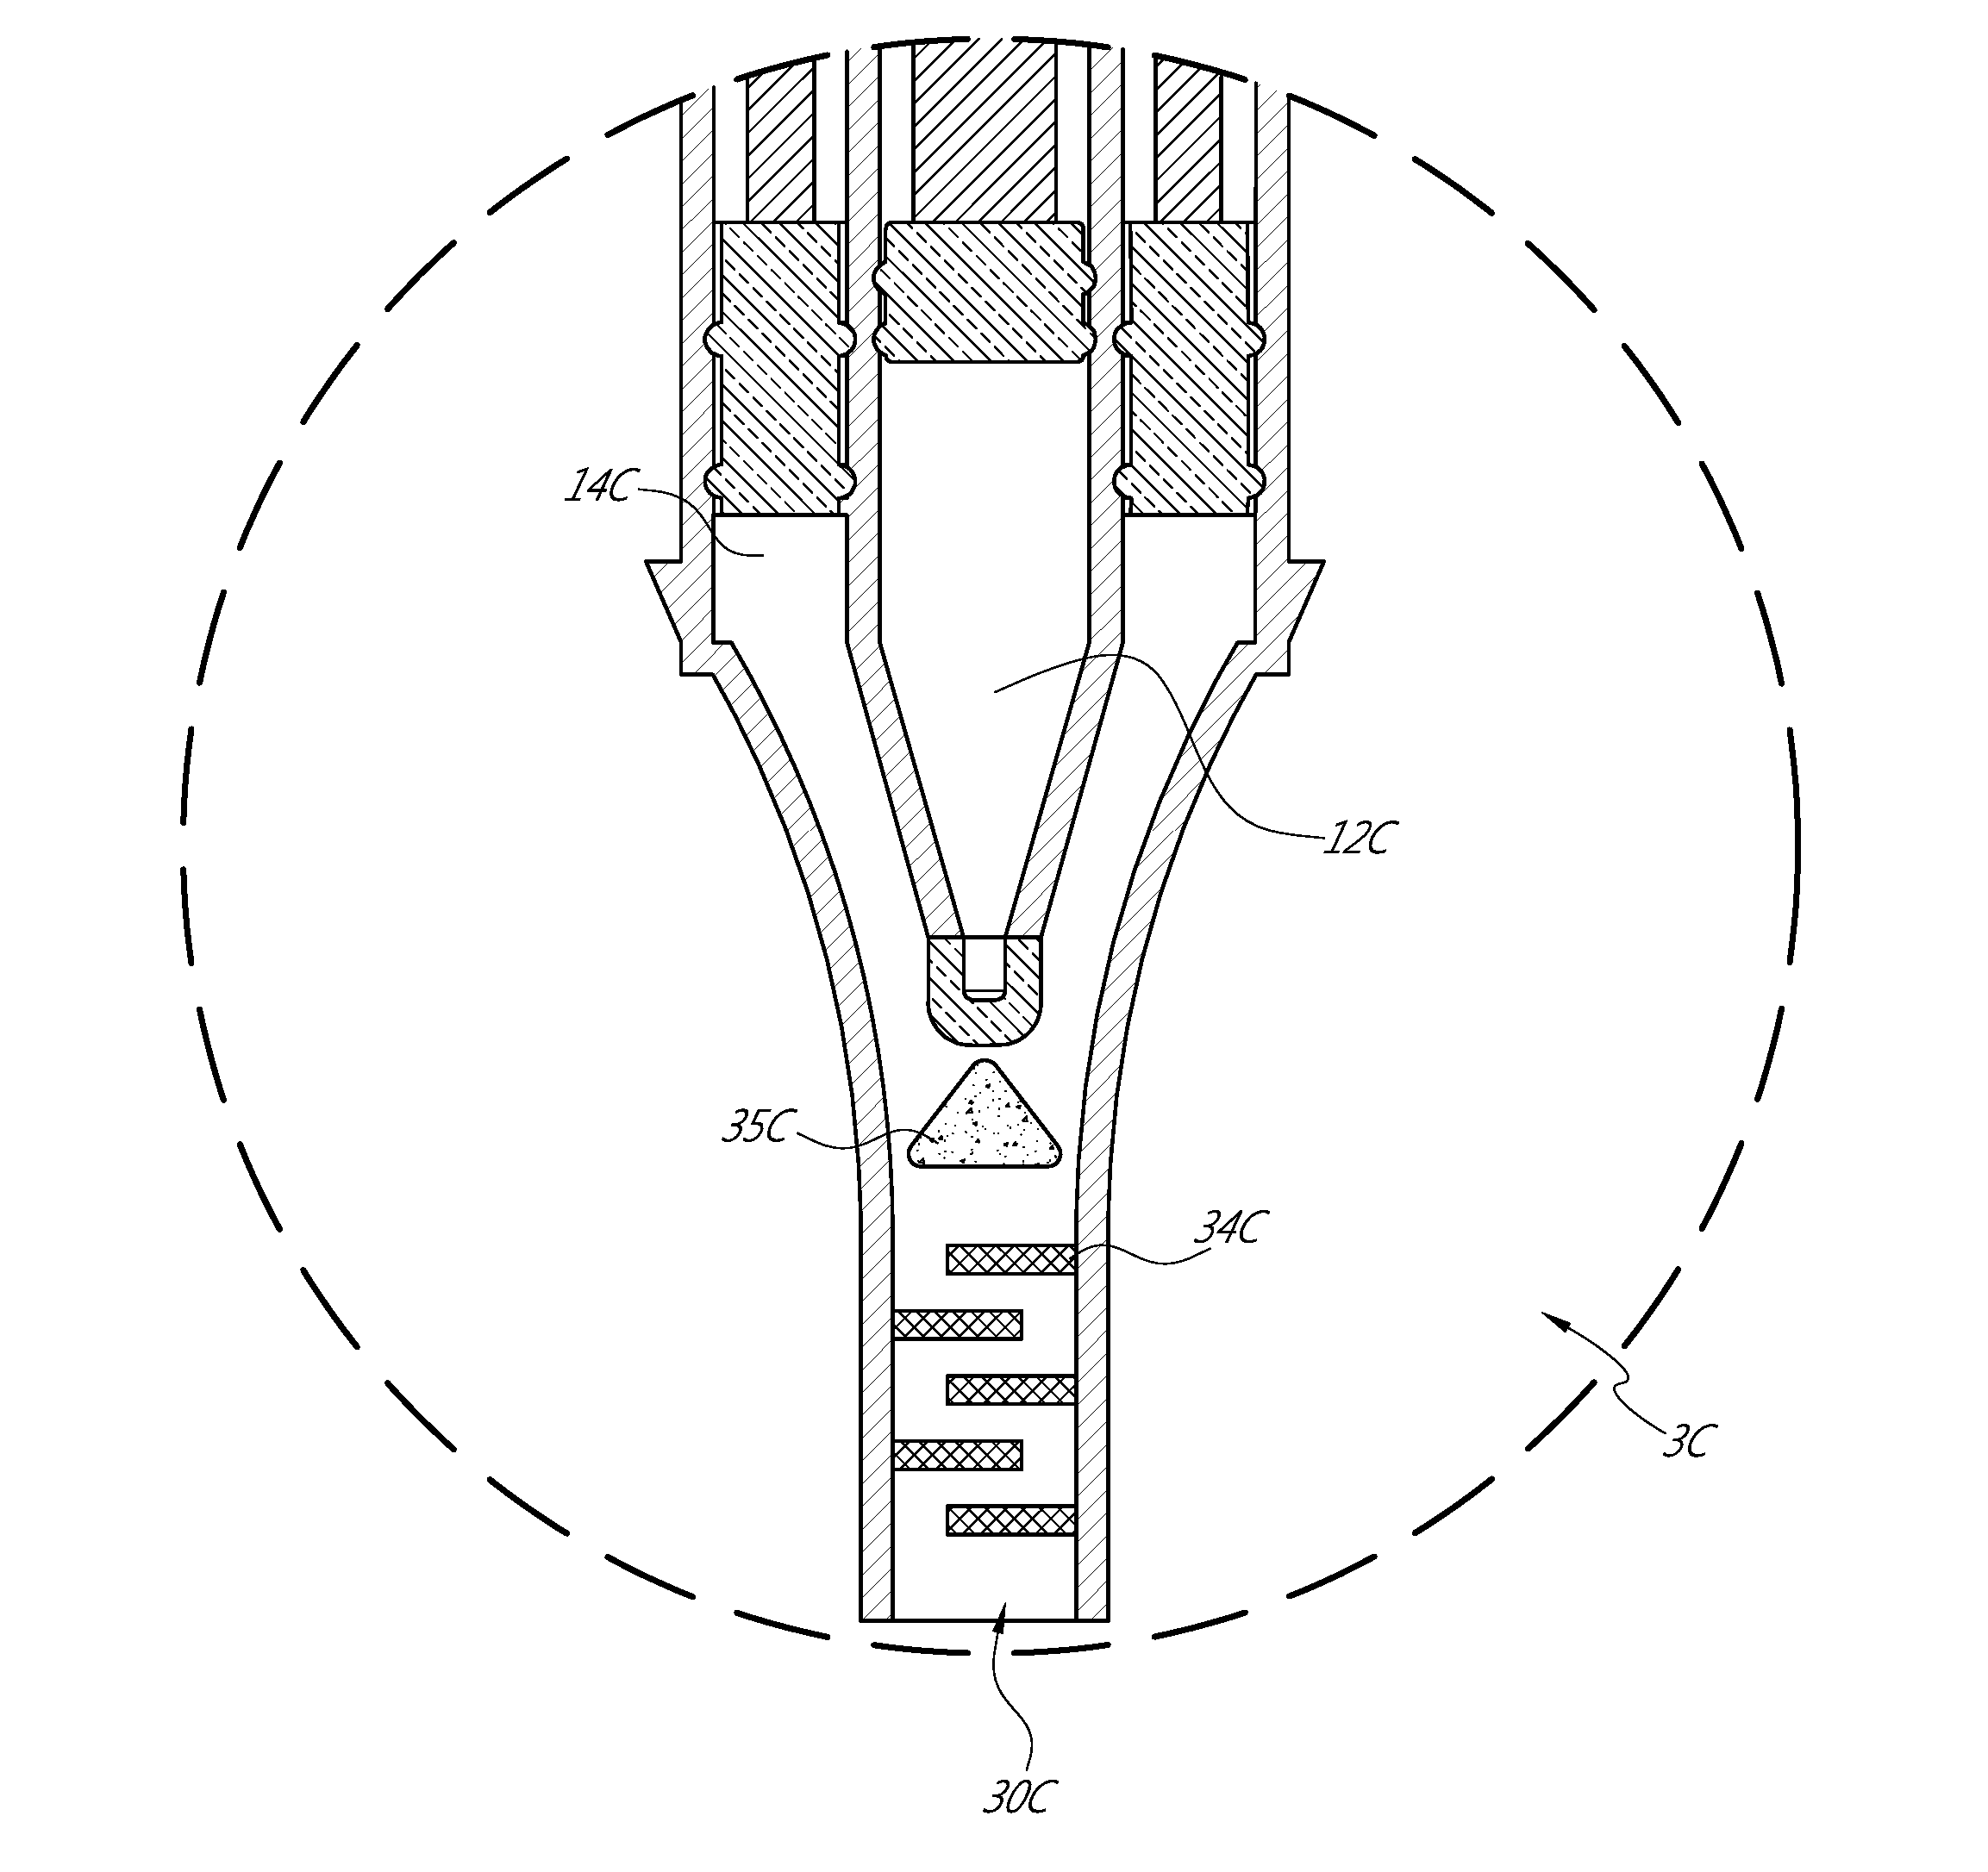 Medical devices and methods for creating bubbles